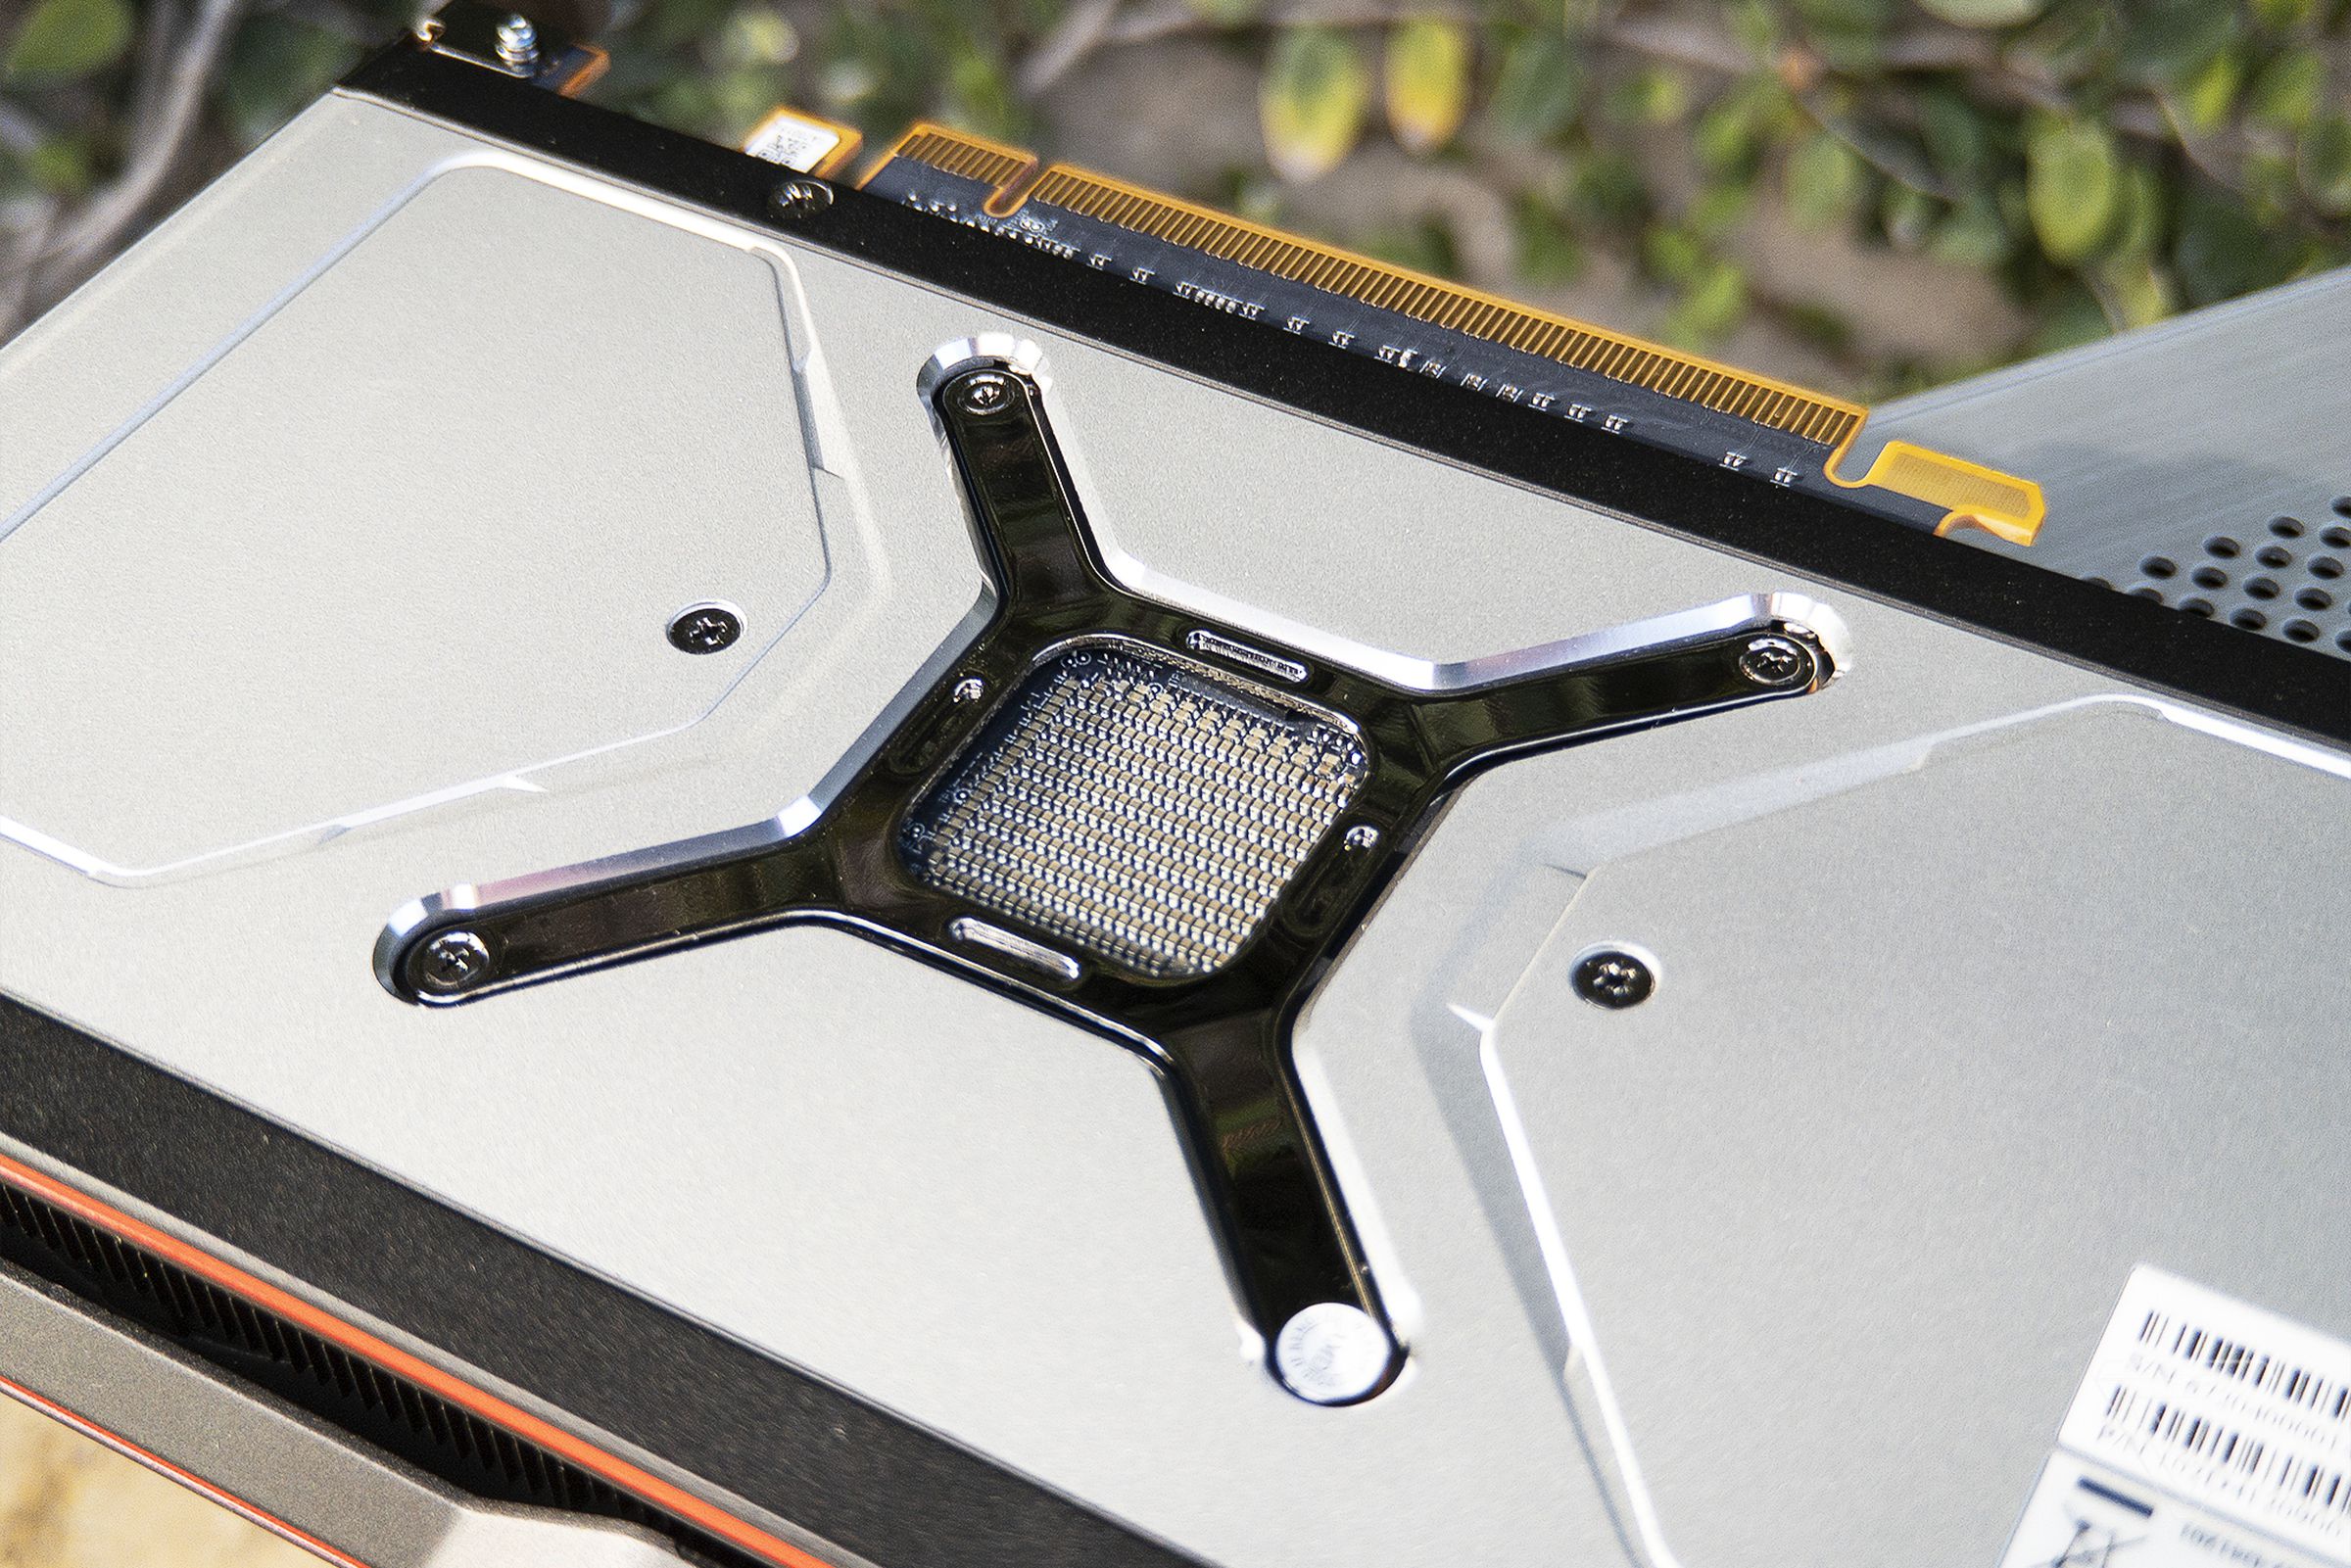 The RX 6800’s backplate, with exposed Phillips head screws.